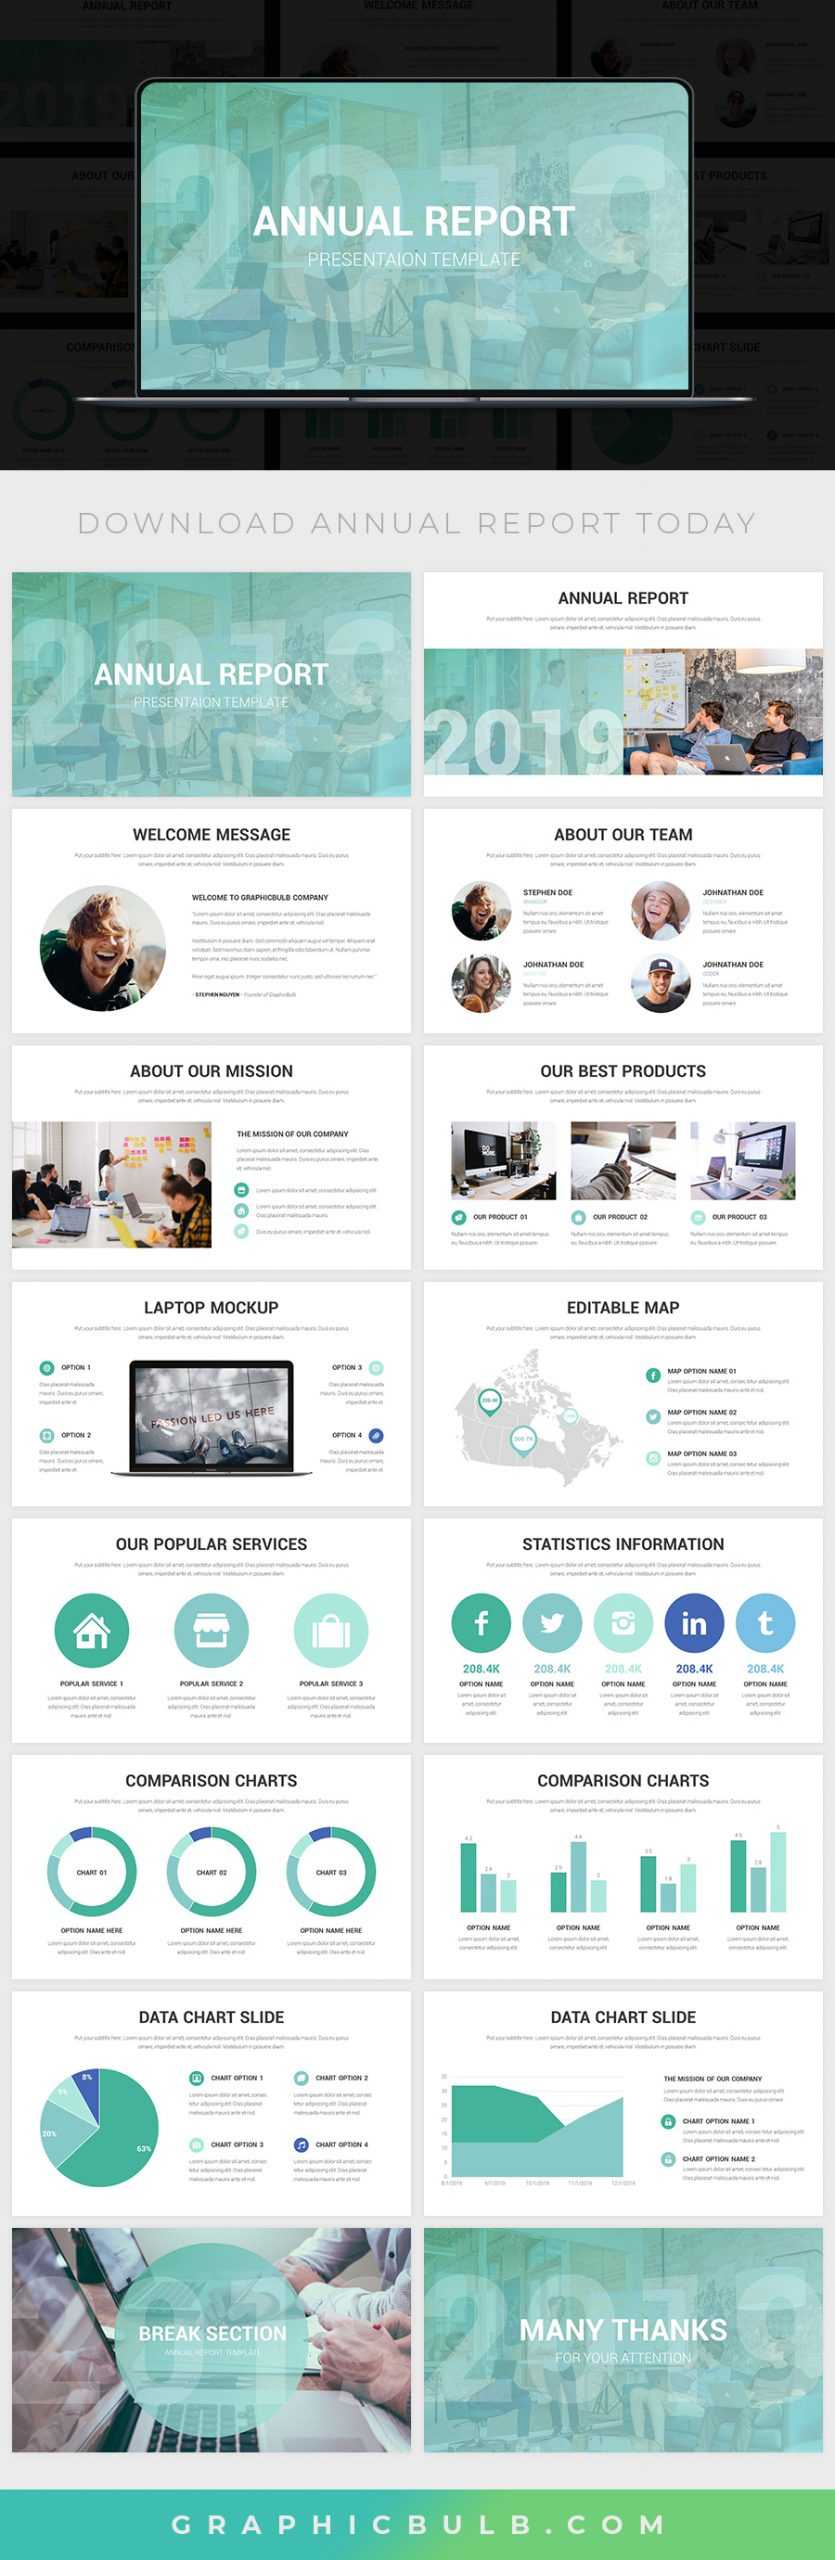 Free Annual Report Powerpoint Template Inside Annual Report Ppt Template